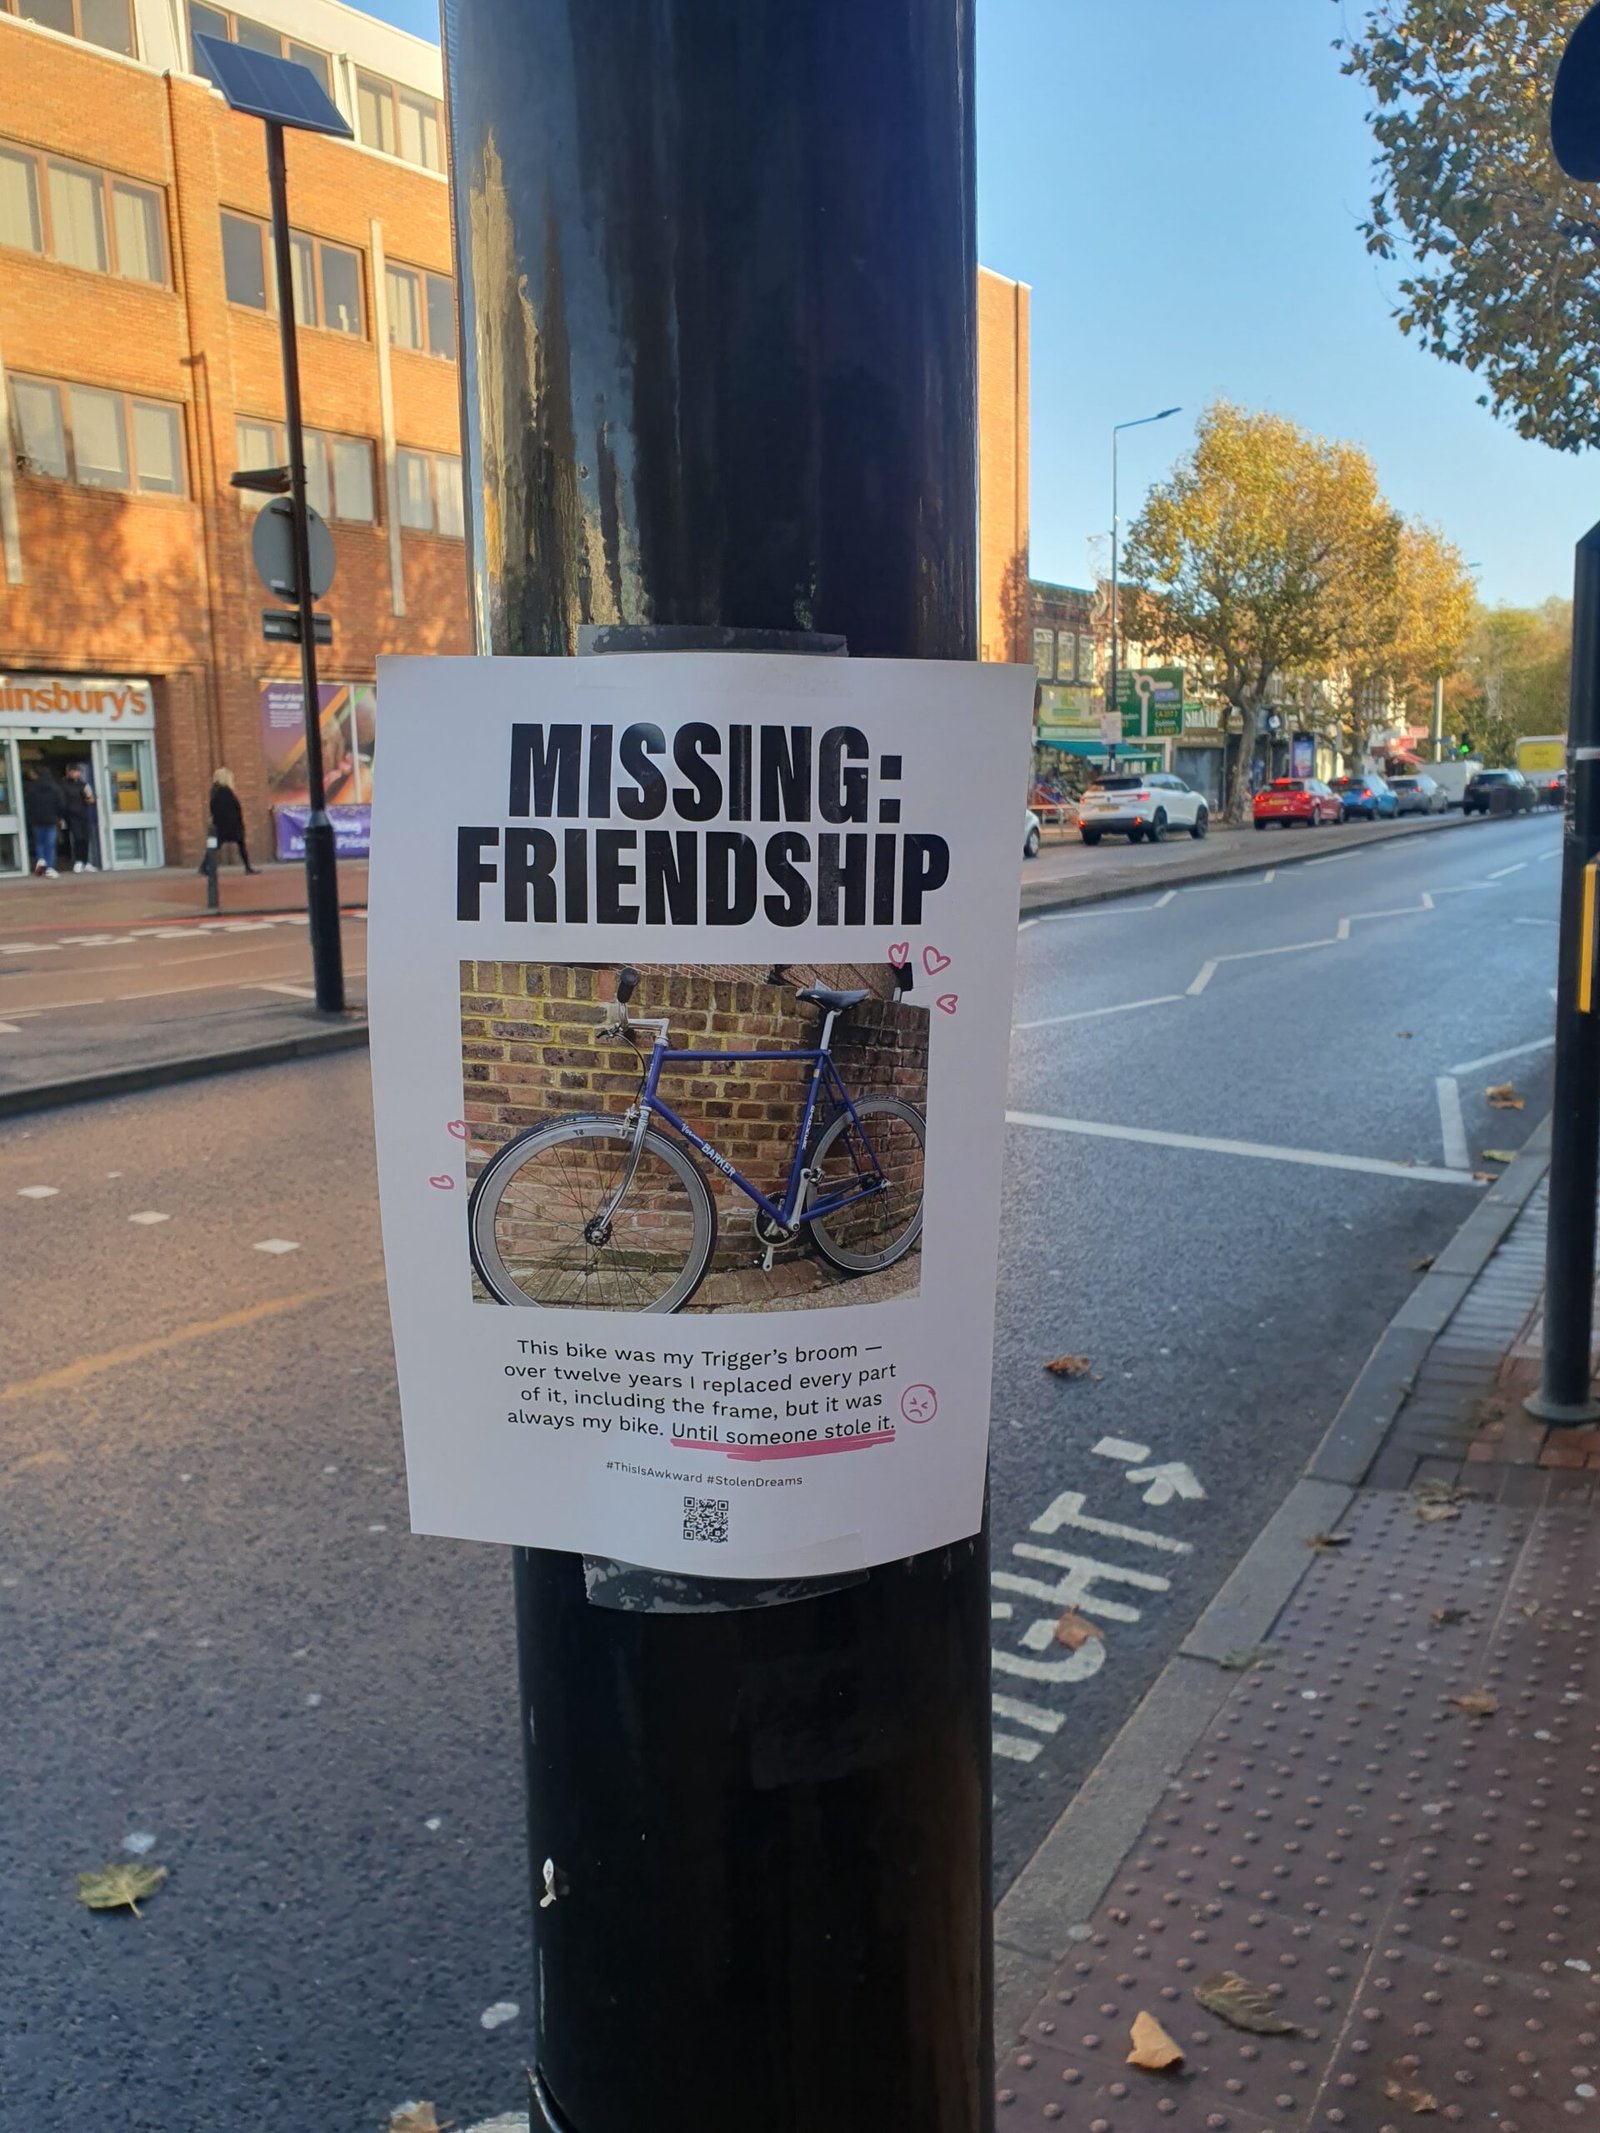 An example of the "Missing" poster ("Lampost Lament") put up around London today